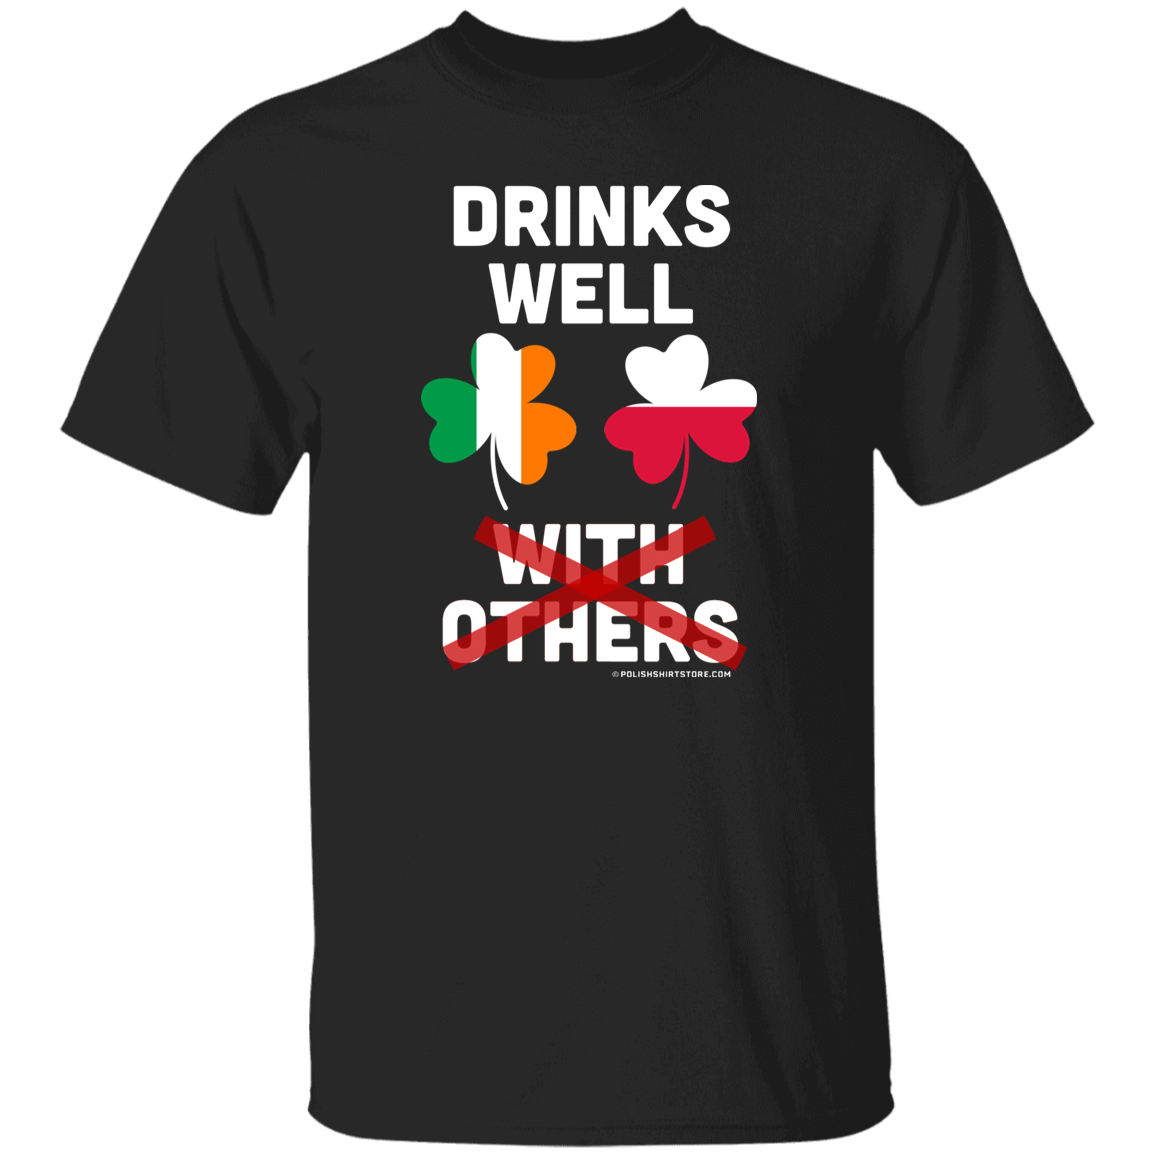 Drinks Well Not With Others Apparel CustomCat G500 5.3 oz. T-Shirt Black S